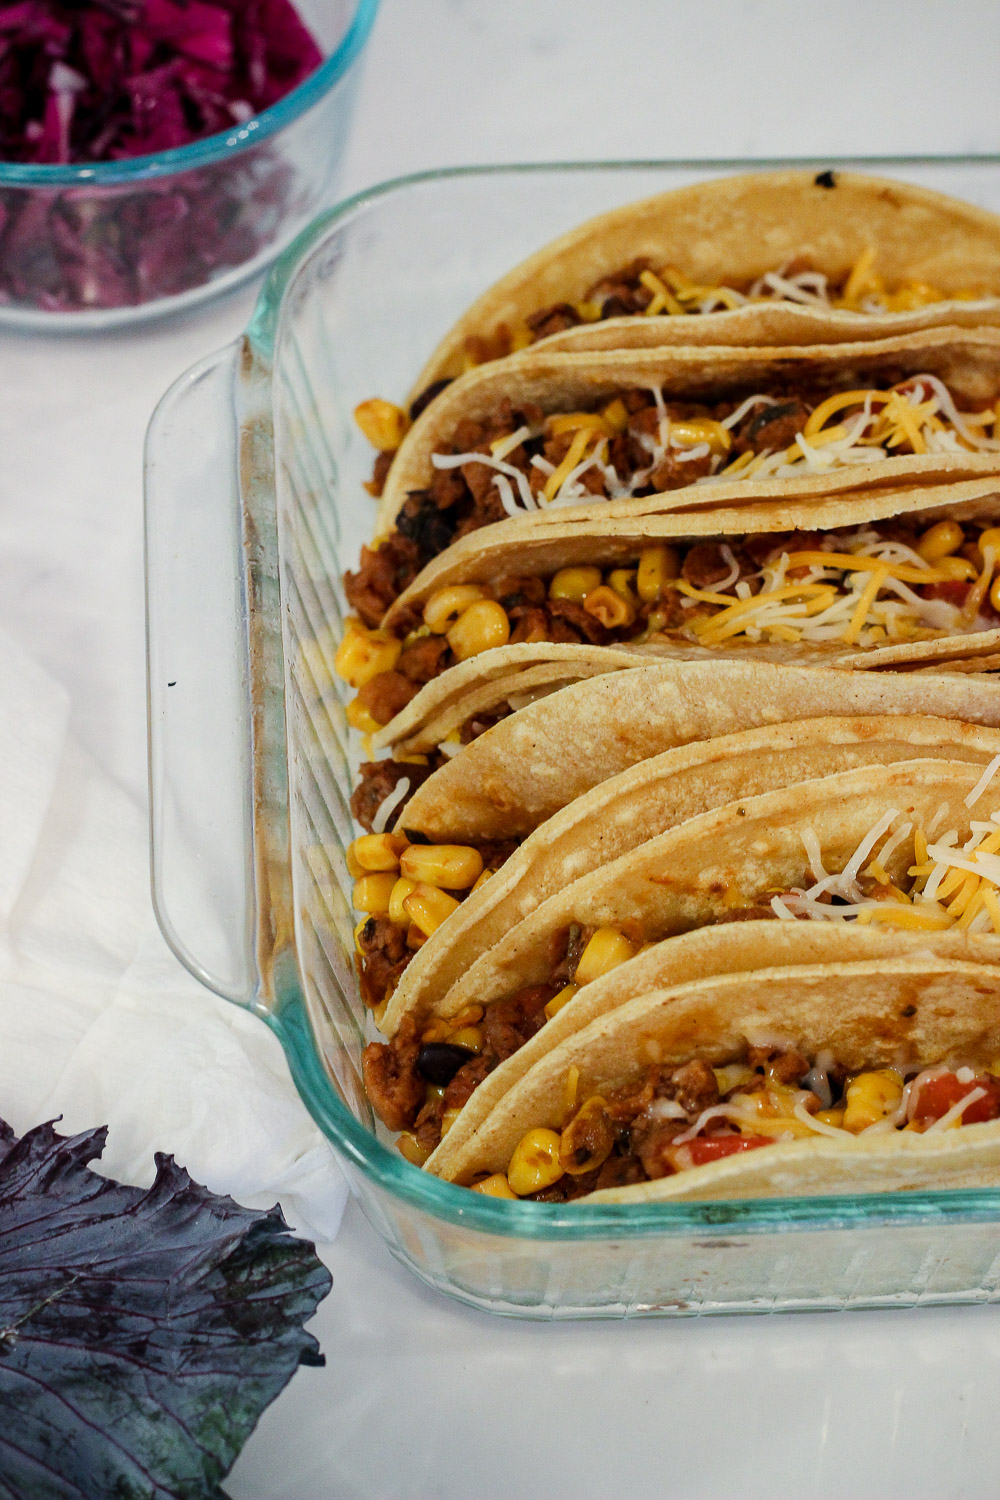 Chipotle Black Bean Baked Tacos